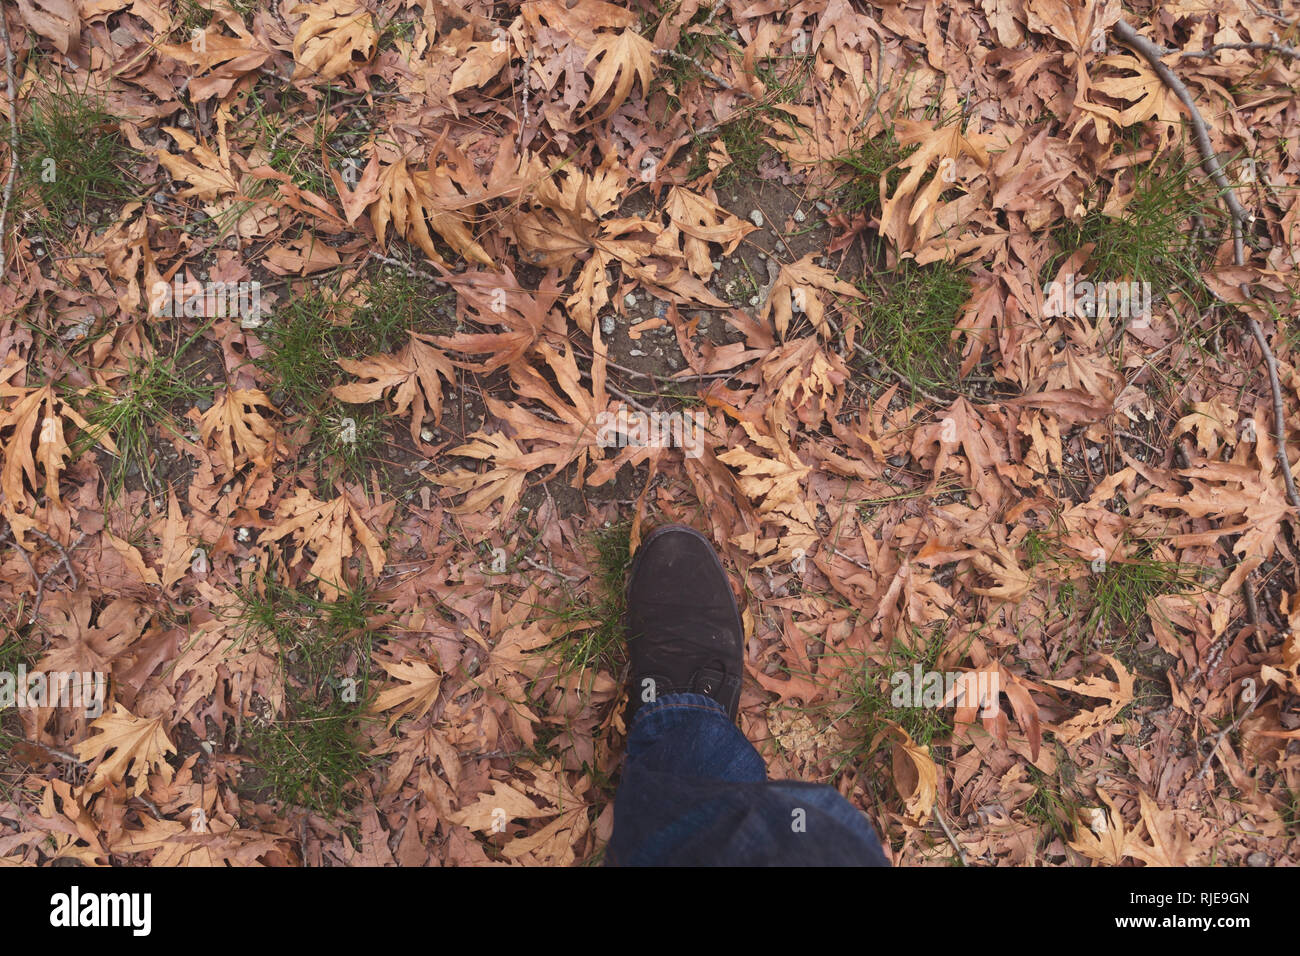 Man Walking on Fallen Autumn Leaves in the Forest Stock Photo